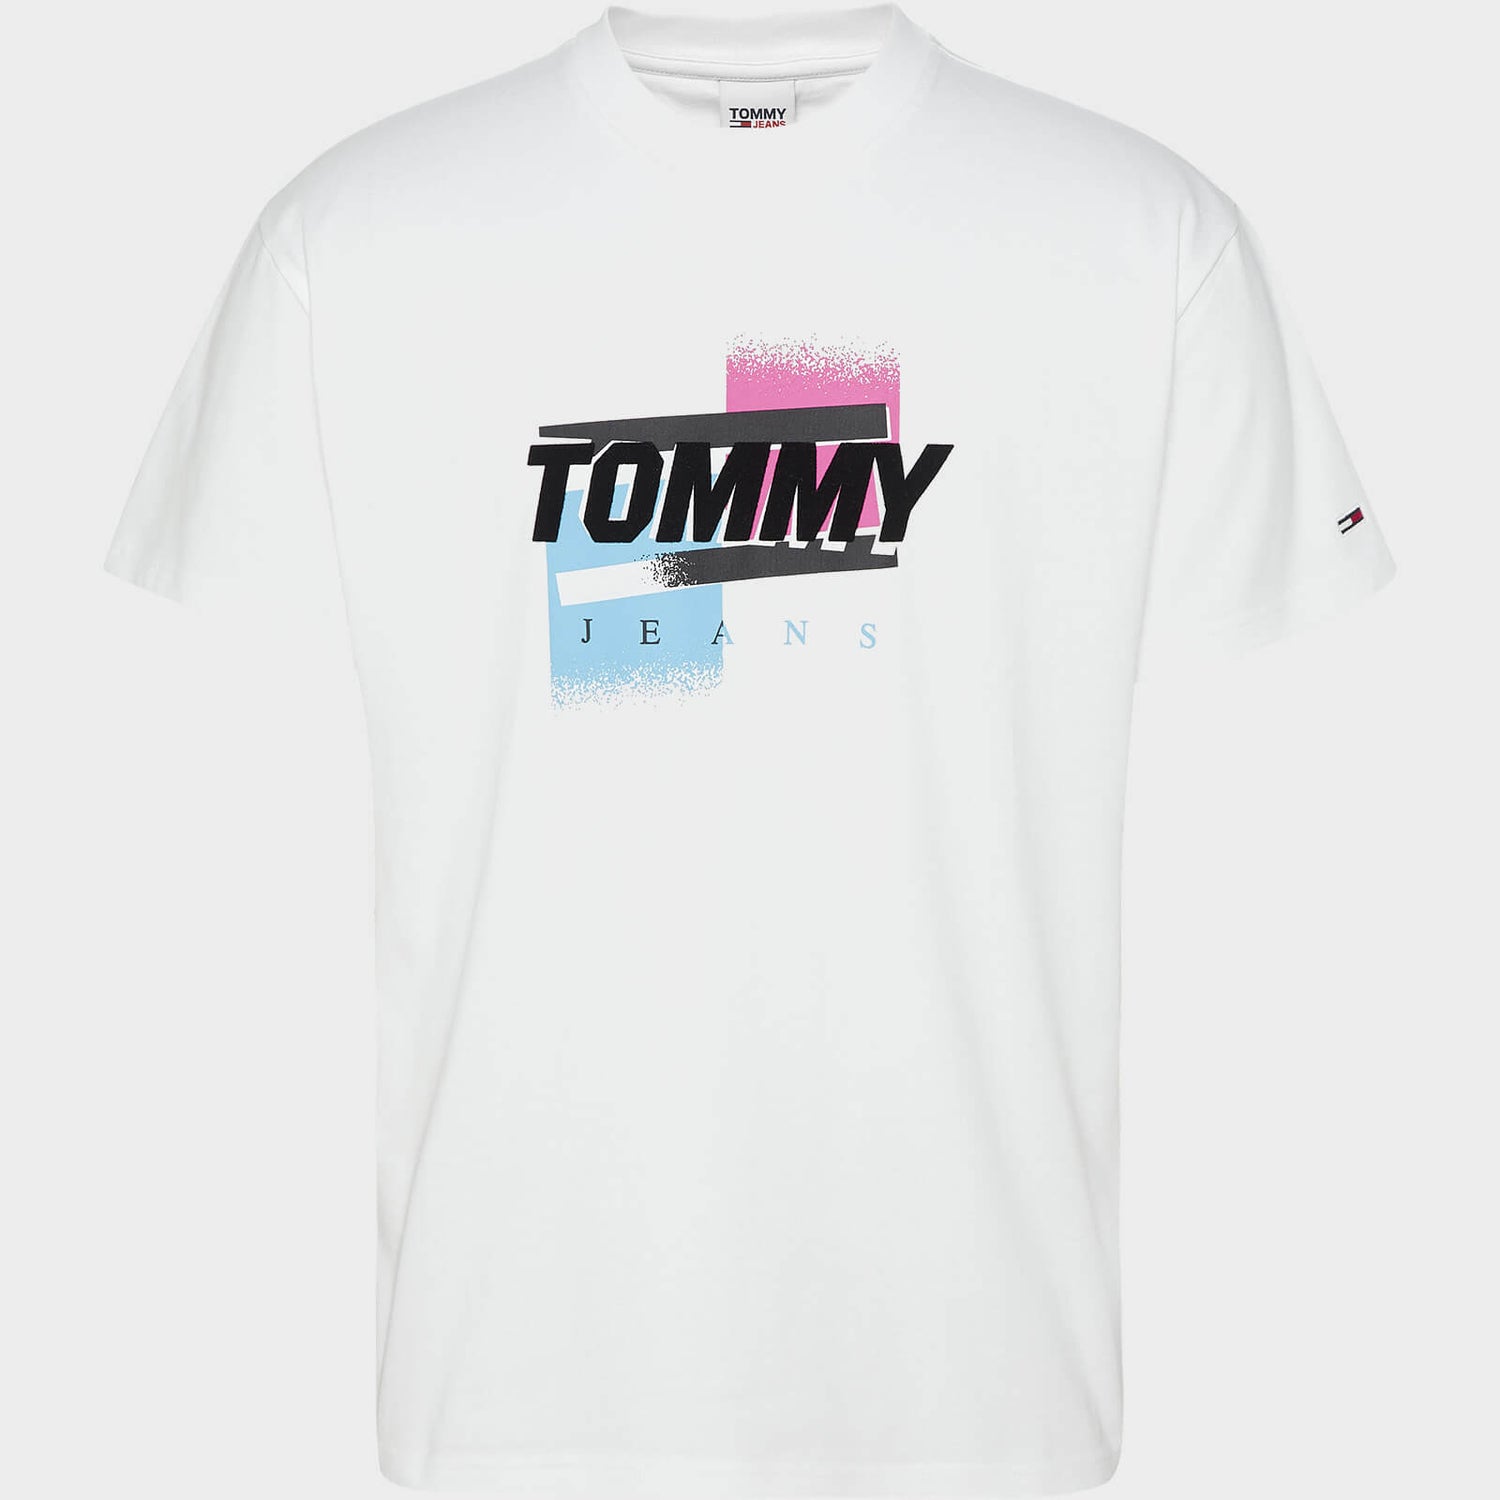 Tommy Jeans Men's Faded Colour Graphic T-Shirt - White